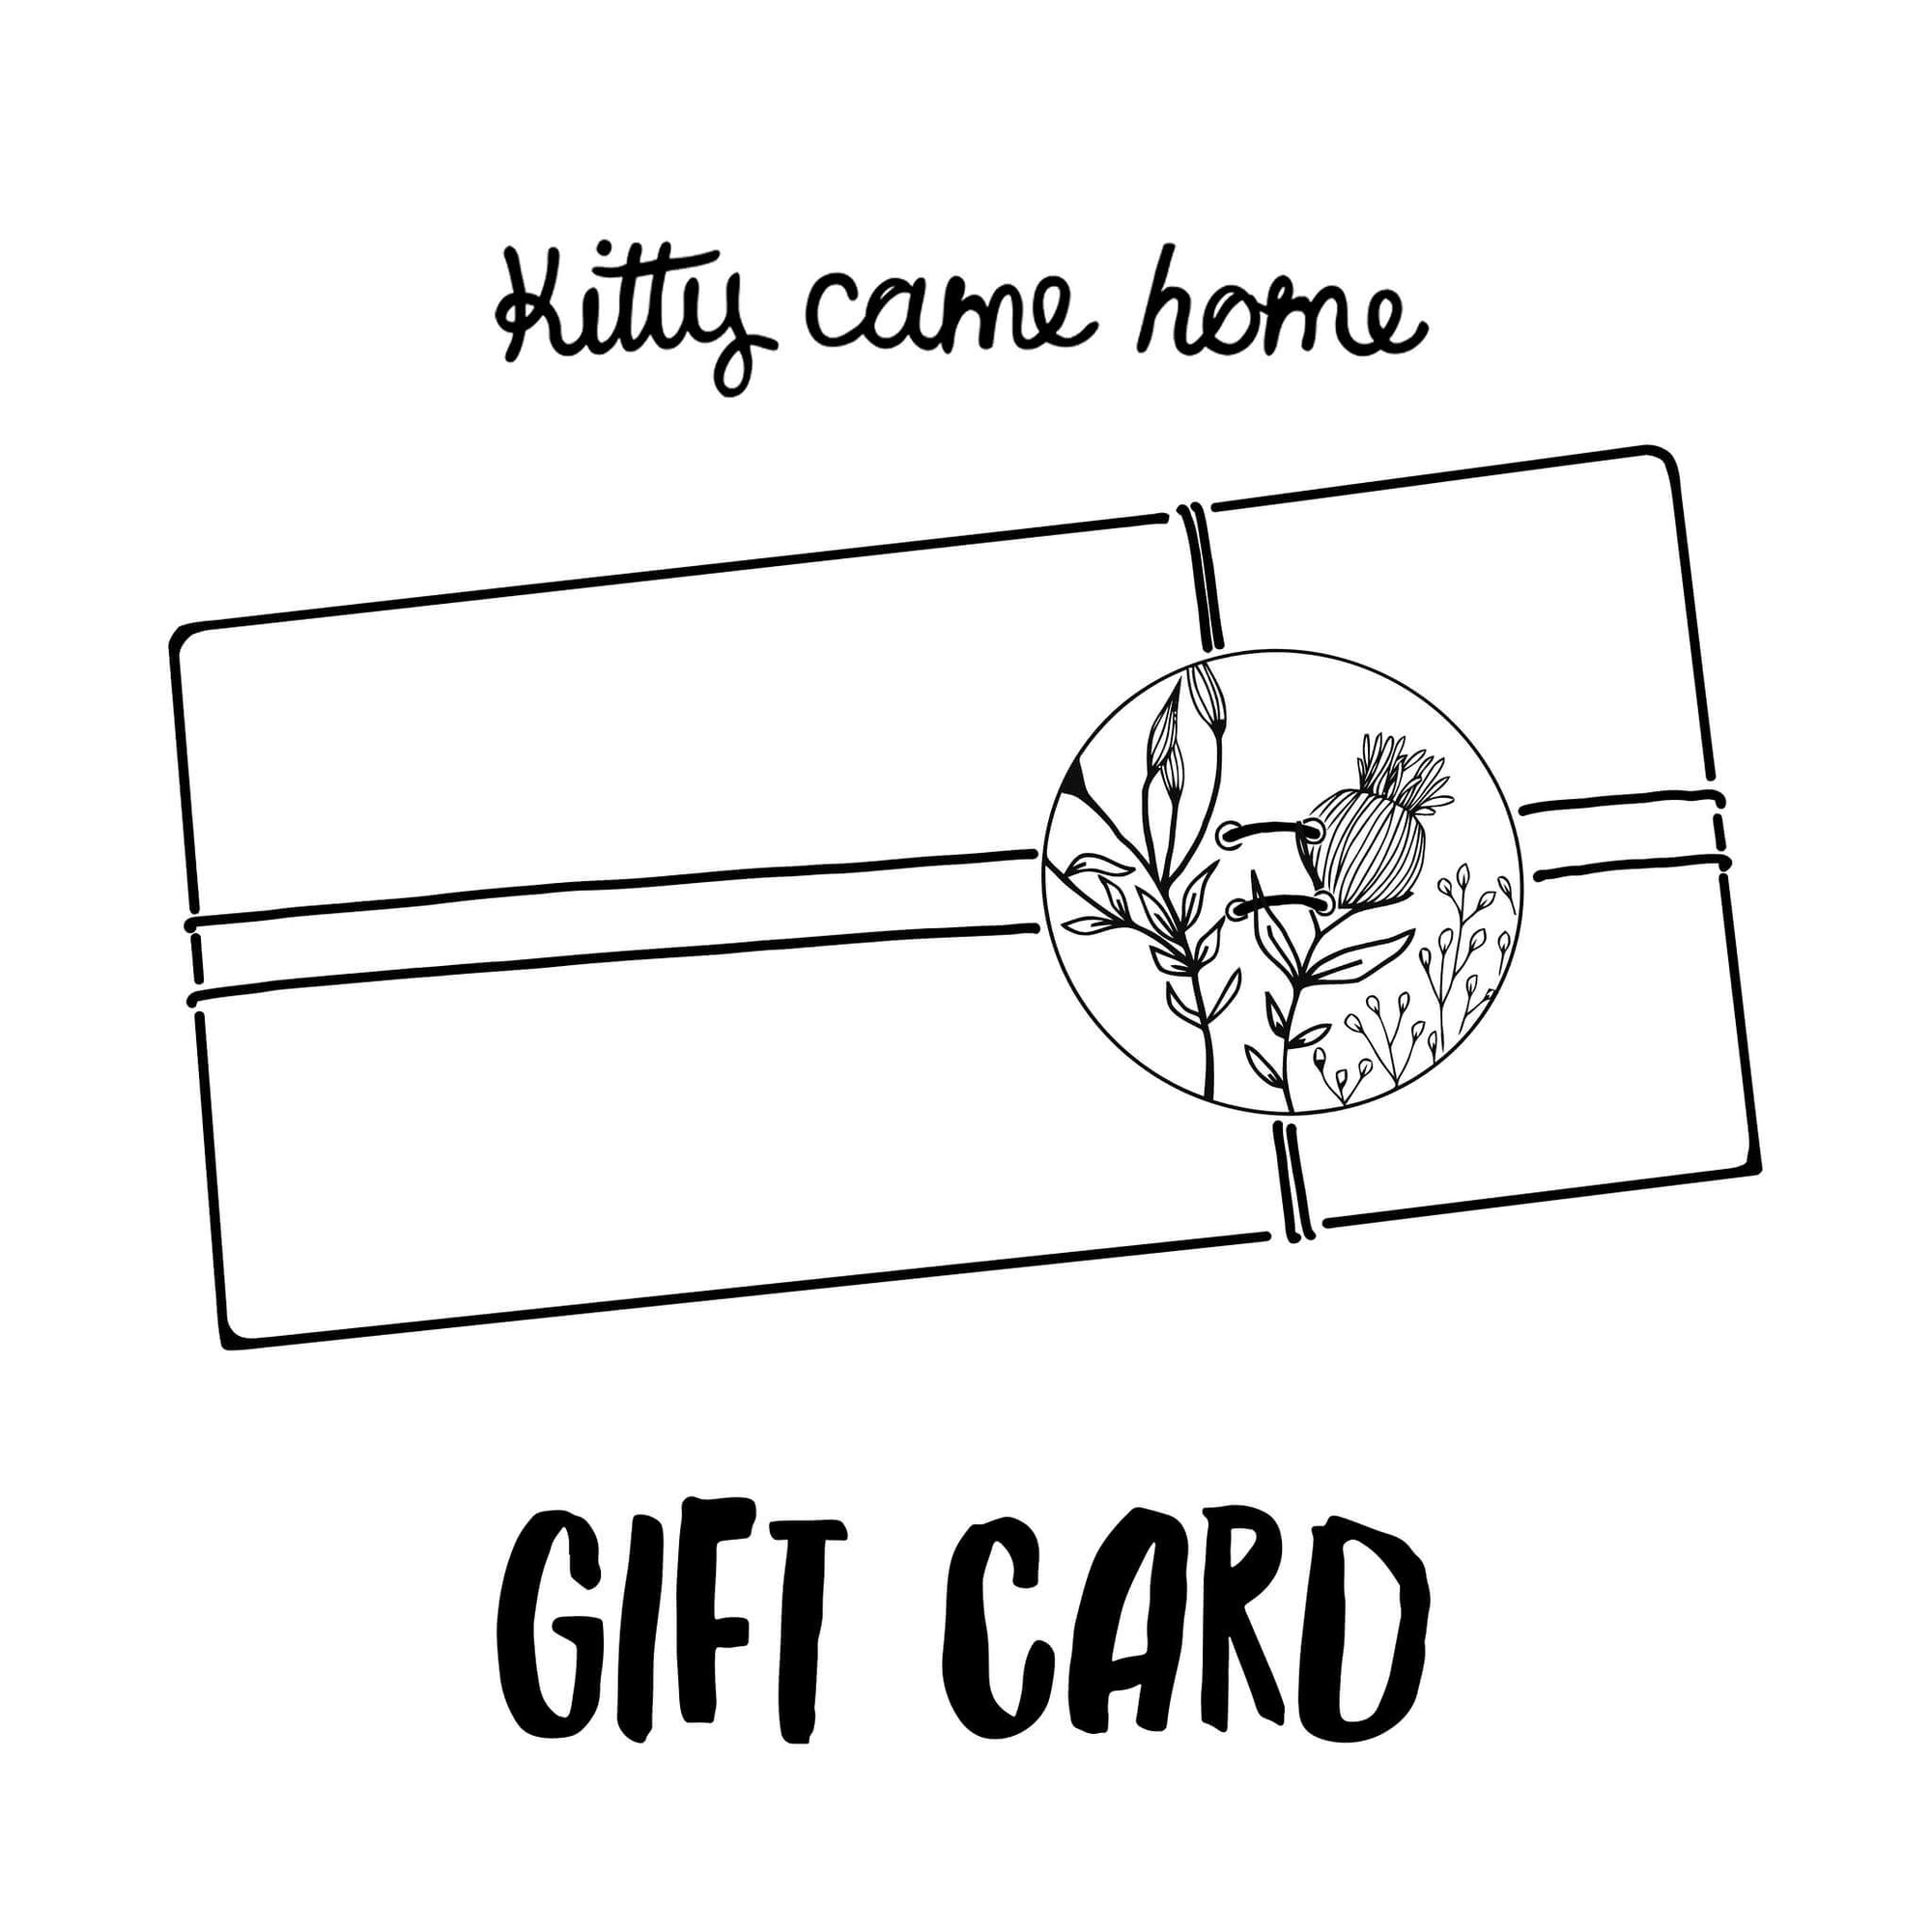 Kitty Came Home - Gift Card